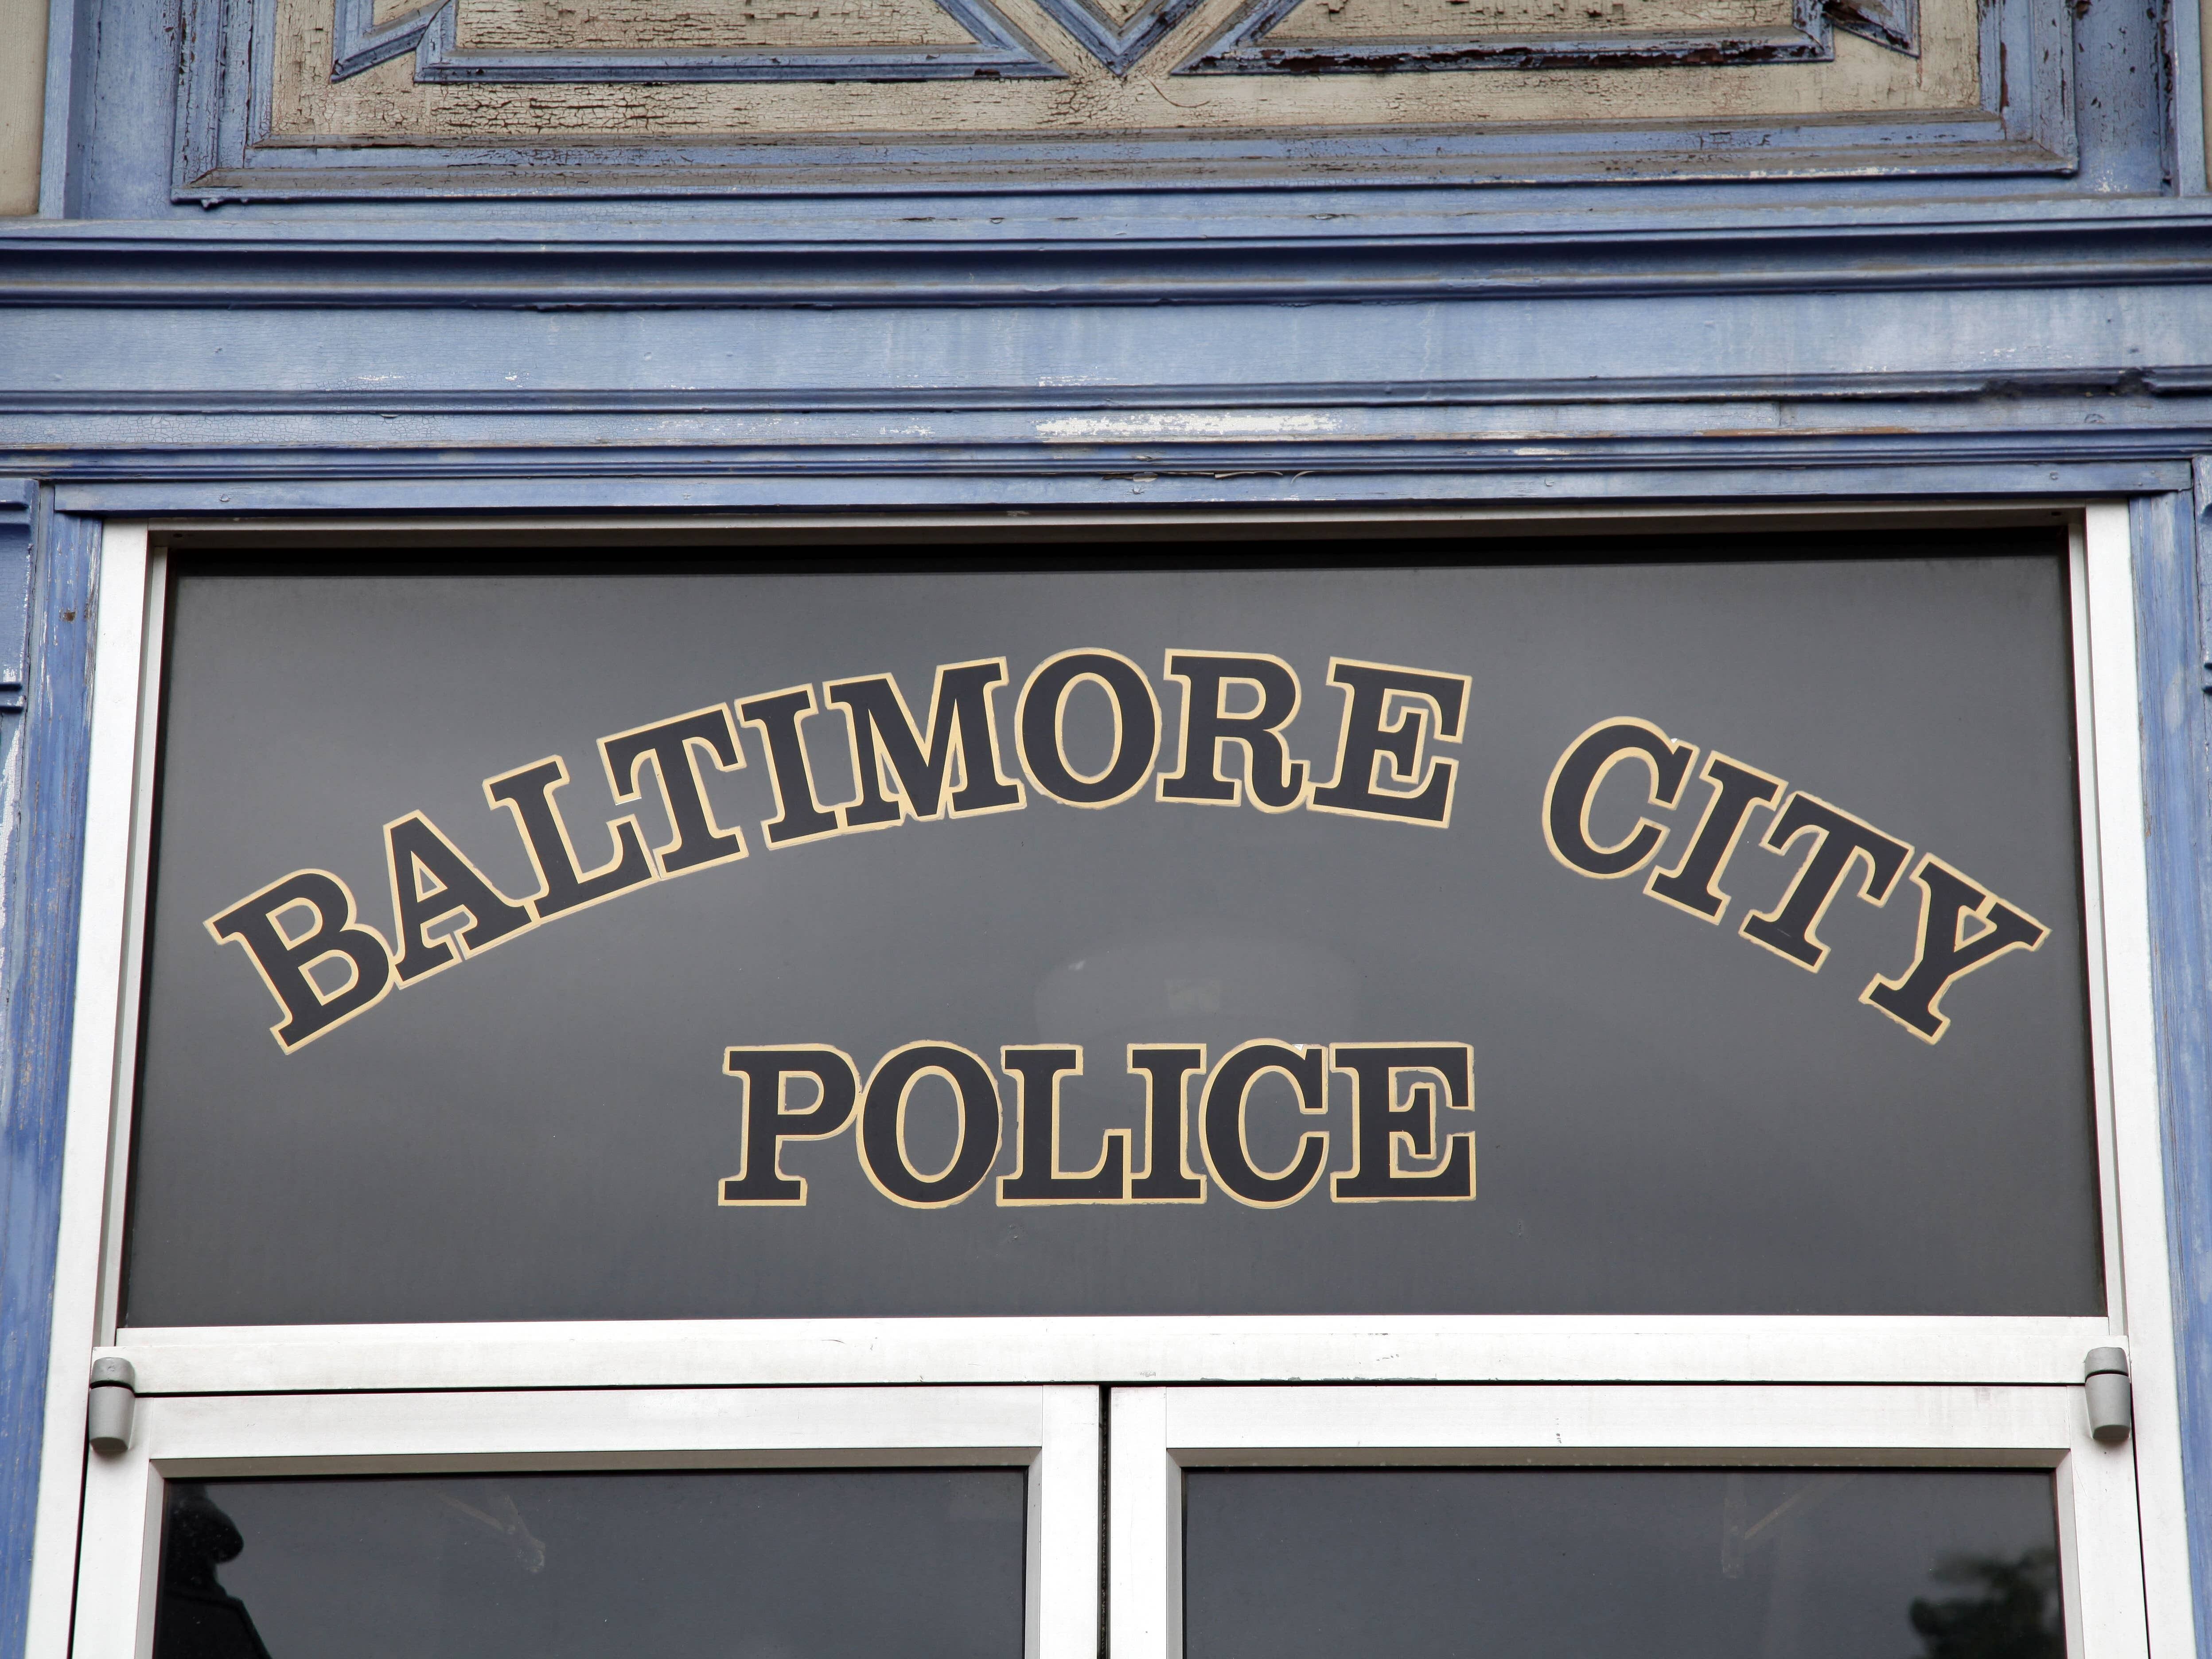 Two killed, 28 injured in mass shooting in Baltimore